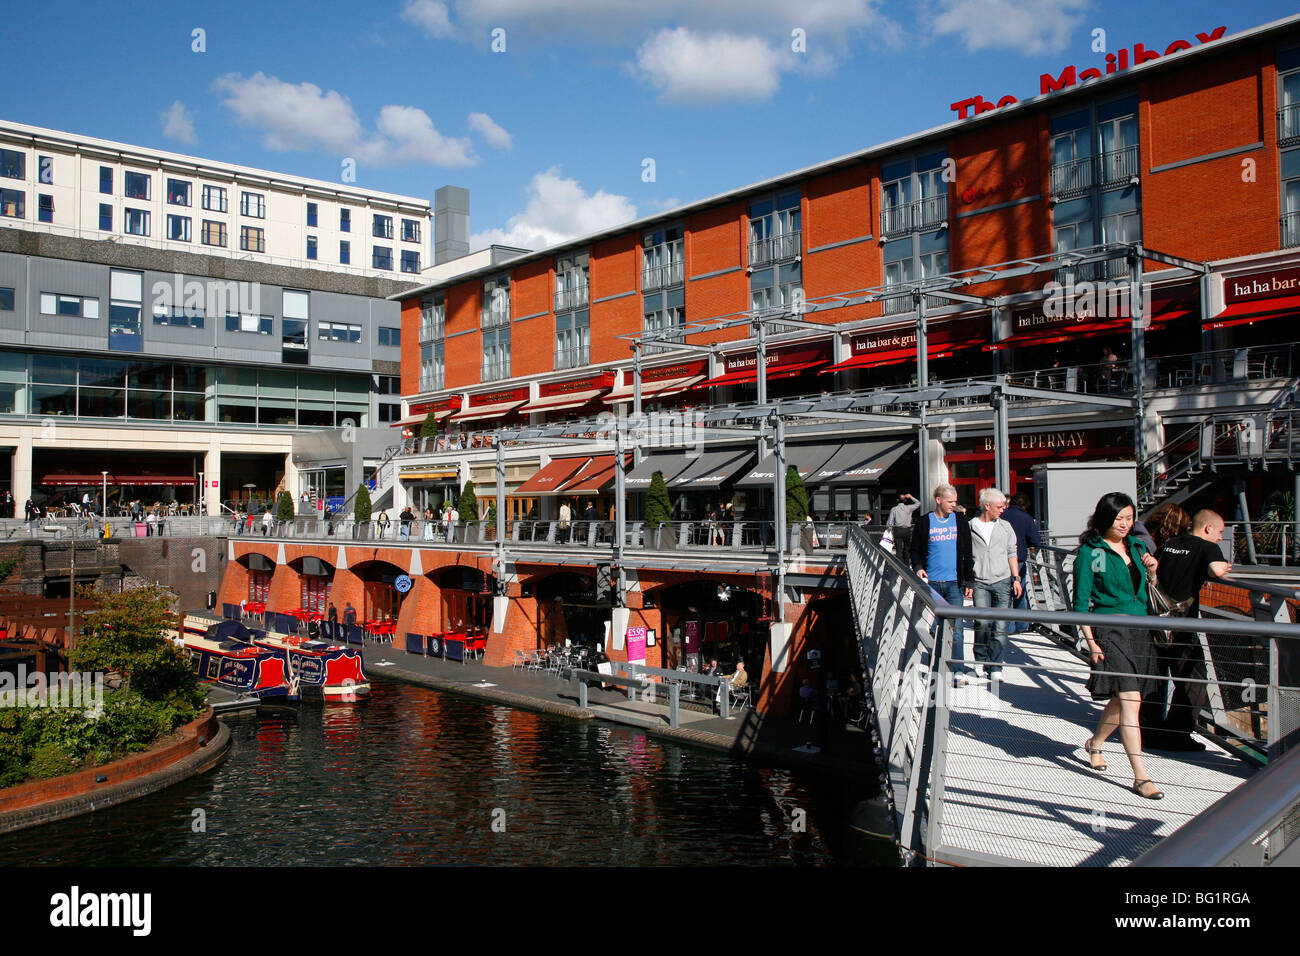 The Mailbox shopping complex with many cafes and restaurants. Birmingham, England, United Kingdom, Europe Stock Photo